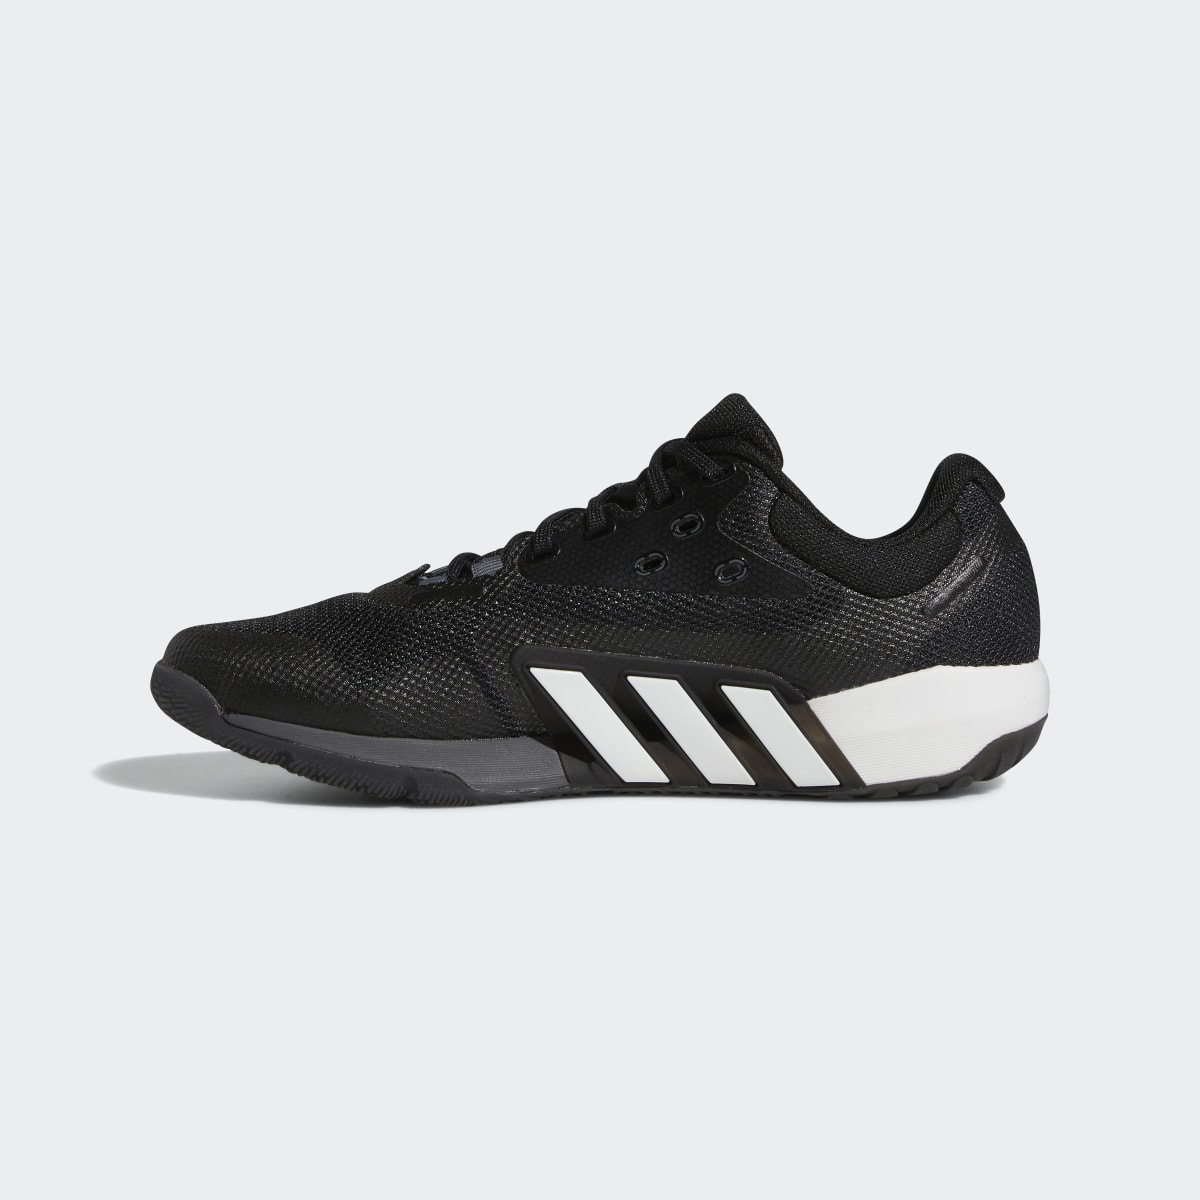 Adidas Dropset Trainers. 8